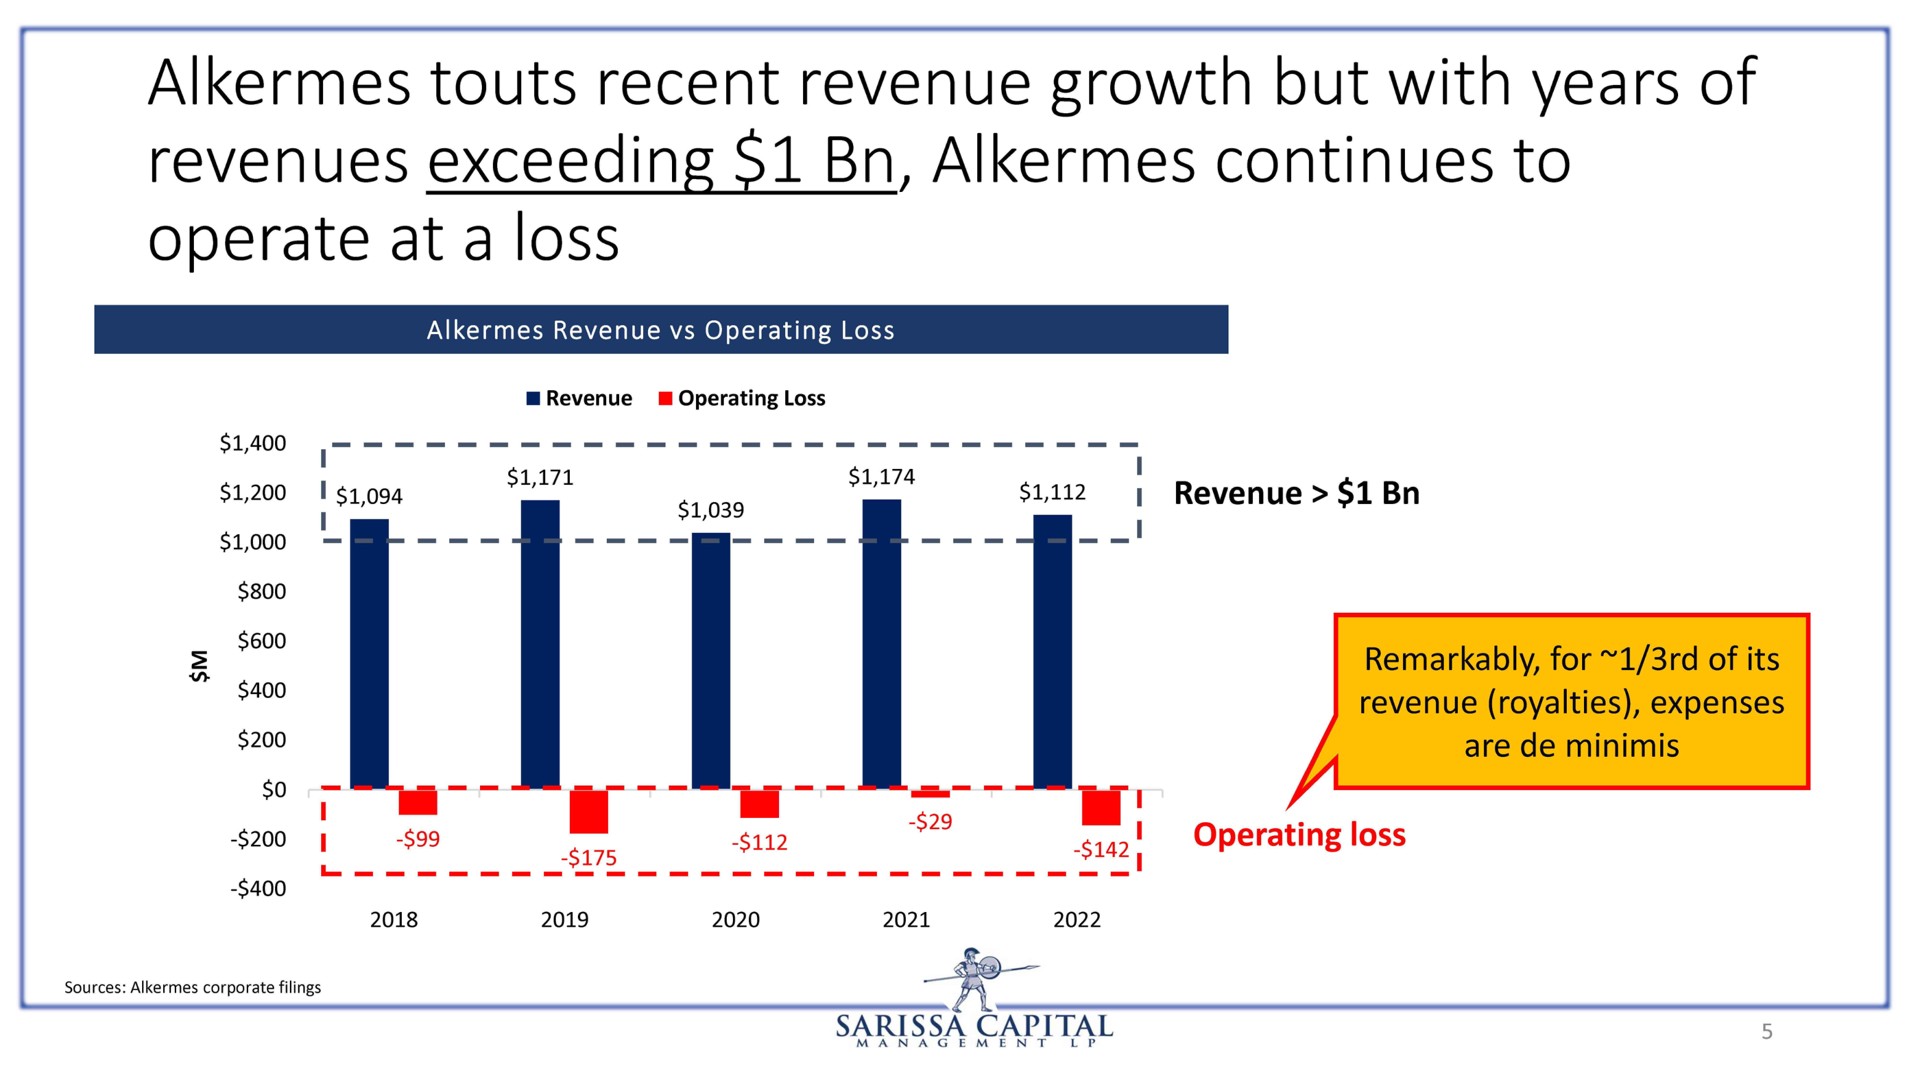 alkermes touts recent revenue growth but with years of operate at a loss | Sarissa Capital